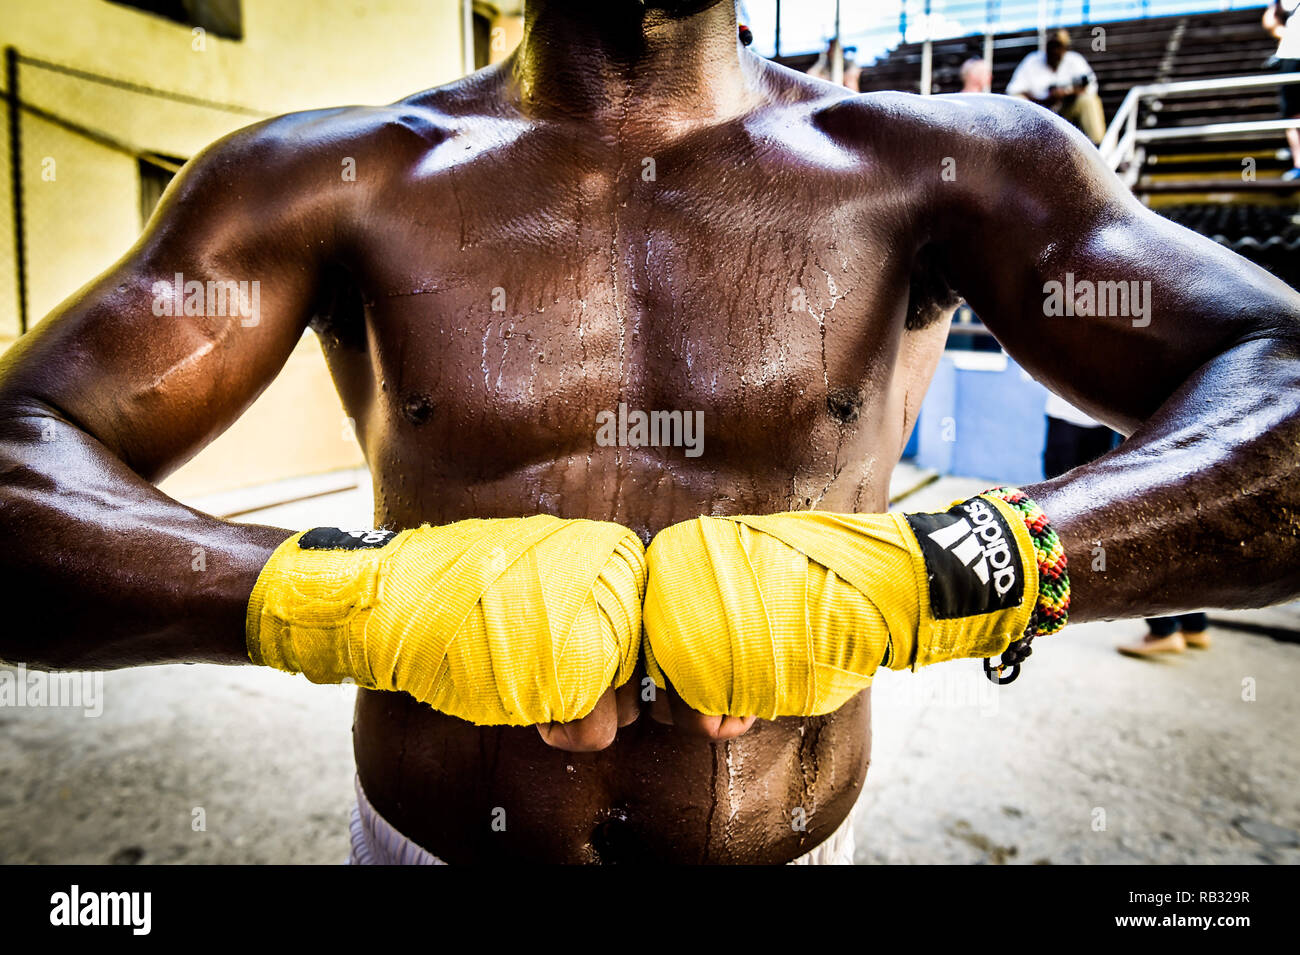 Havana, Havana, Cuba. 9th Oct, 2018. Boxer's hands with bandages at the Rafael Trejo training camp in Havana, Cuba.Cuban boxers are the most successful in the history of amateur boxing, Cuba has won 32 Olympic boxing gold medals since 1972, .In 1962, professional boxing in Cuba was banned by Fidel Castro. As a consequence of Castro's ban, if fighters want to pursue their dream of becoming world champions they have to make the heartbreaking decision to defect from the country and It can be very tough for them because they are excommunicated and separated from their families. The two main Stock Photo